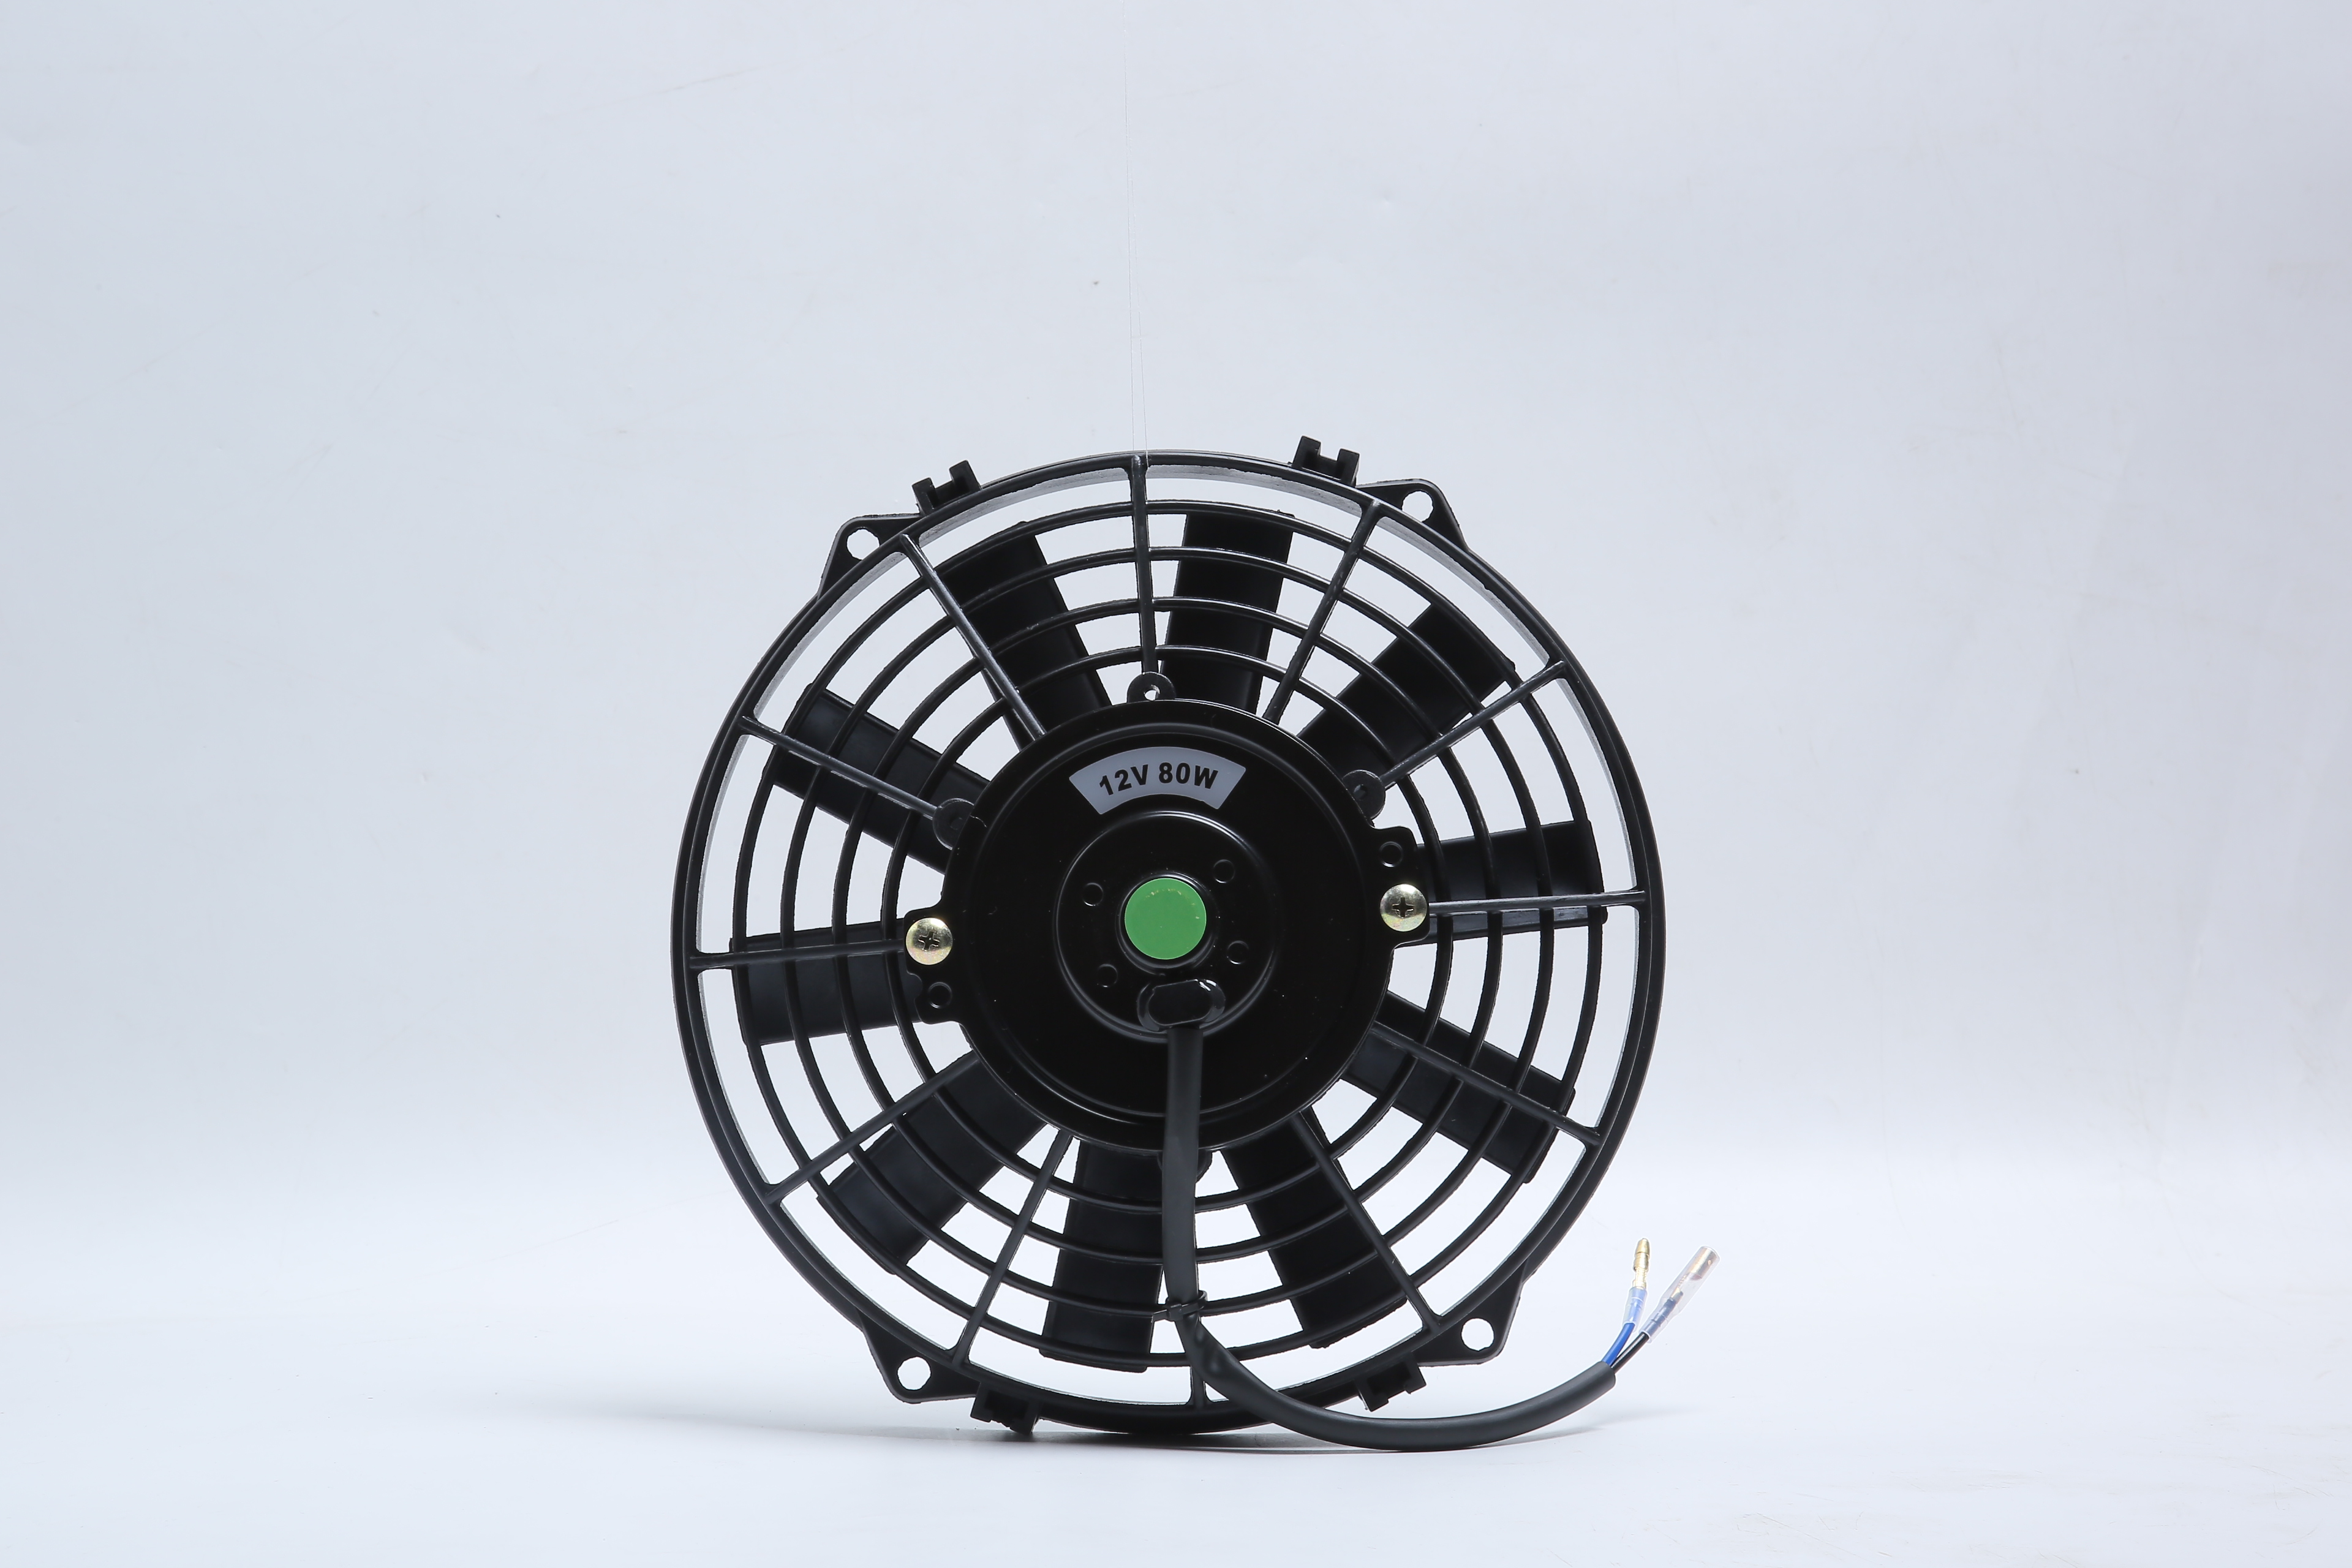  DC 24V 80W 7inch Cooling Radiator Fan Blow/suction